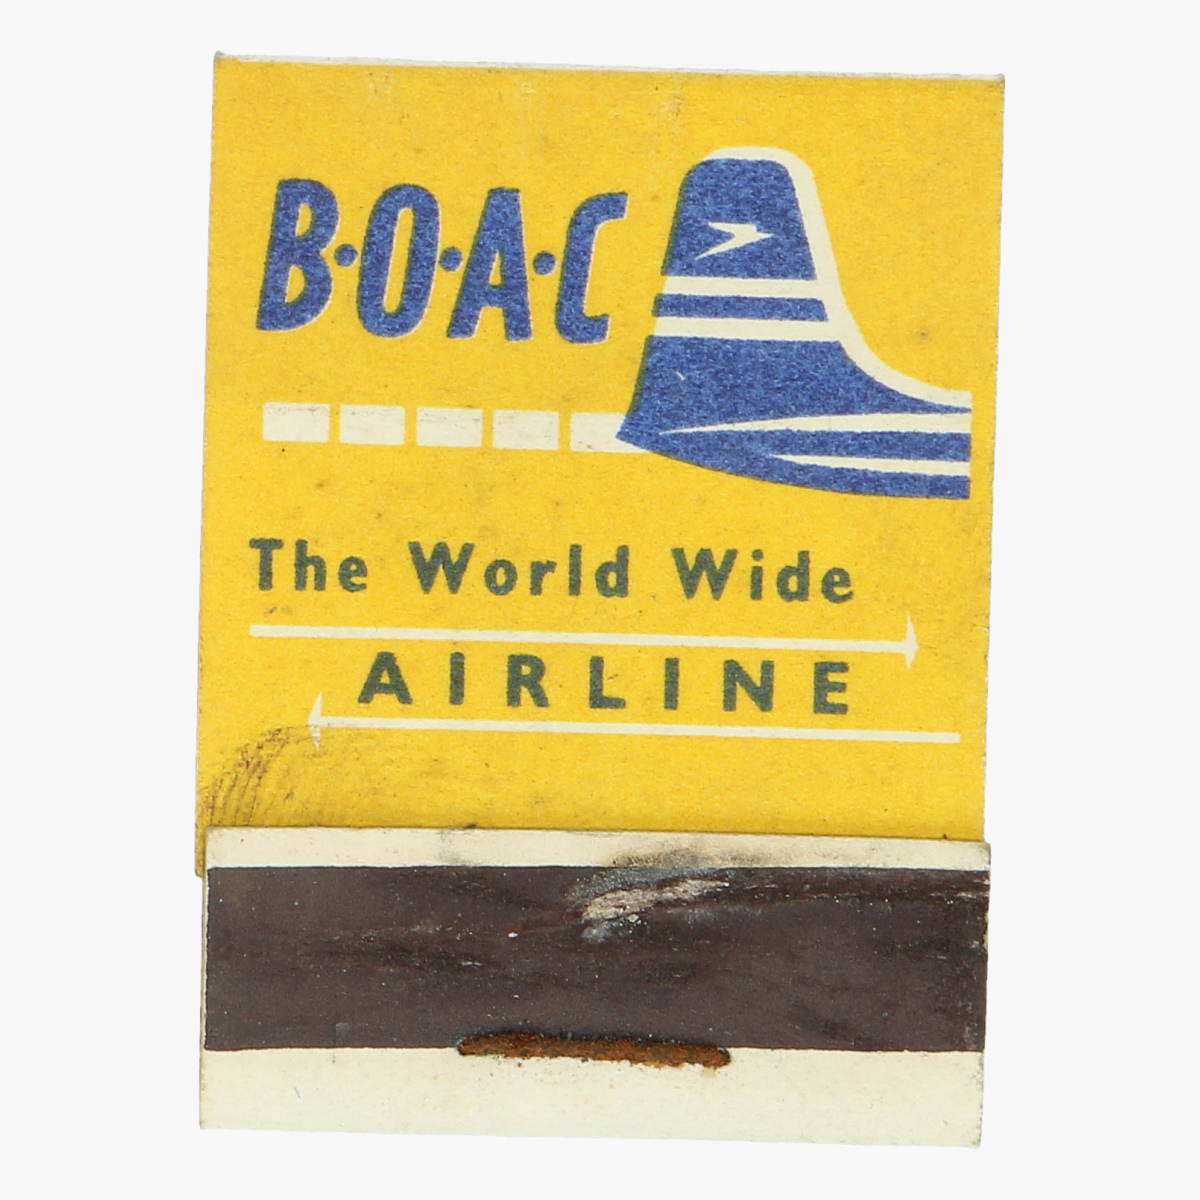 Afbeeldingen van expo 58 lucifers b.o.a.c the world wide airline